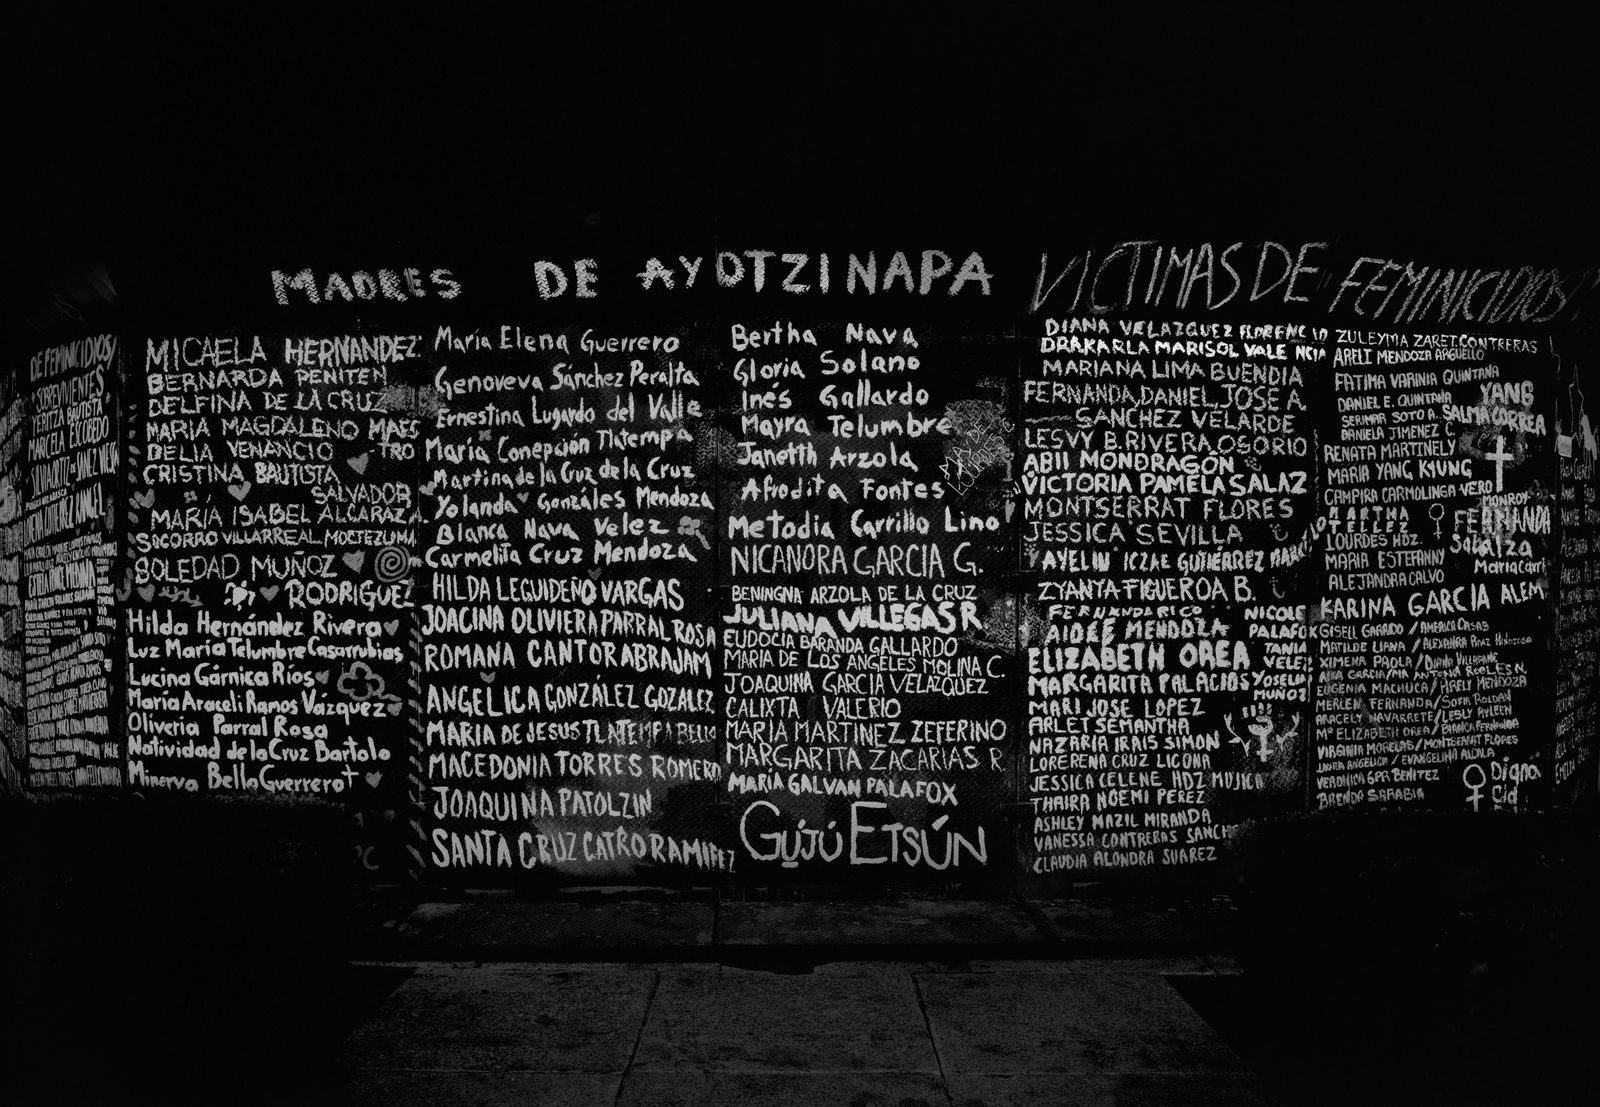 © Lisa Gervassi - Anti-monument to remember the mothers of the Ayotzinapa students as well as recent victimes of femicide.